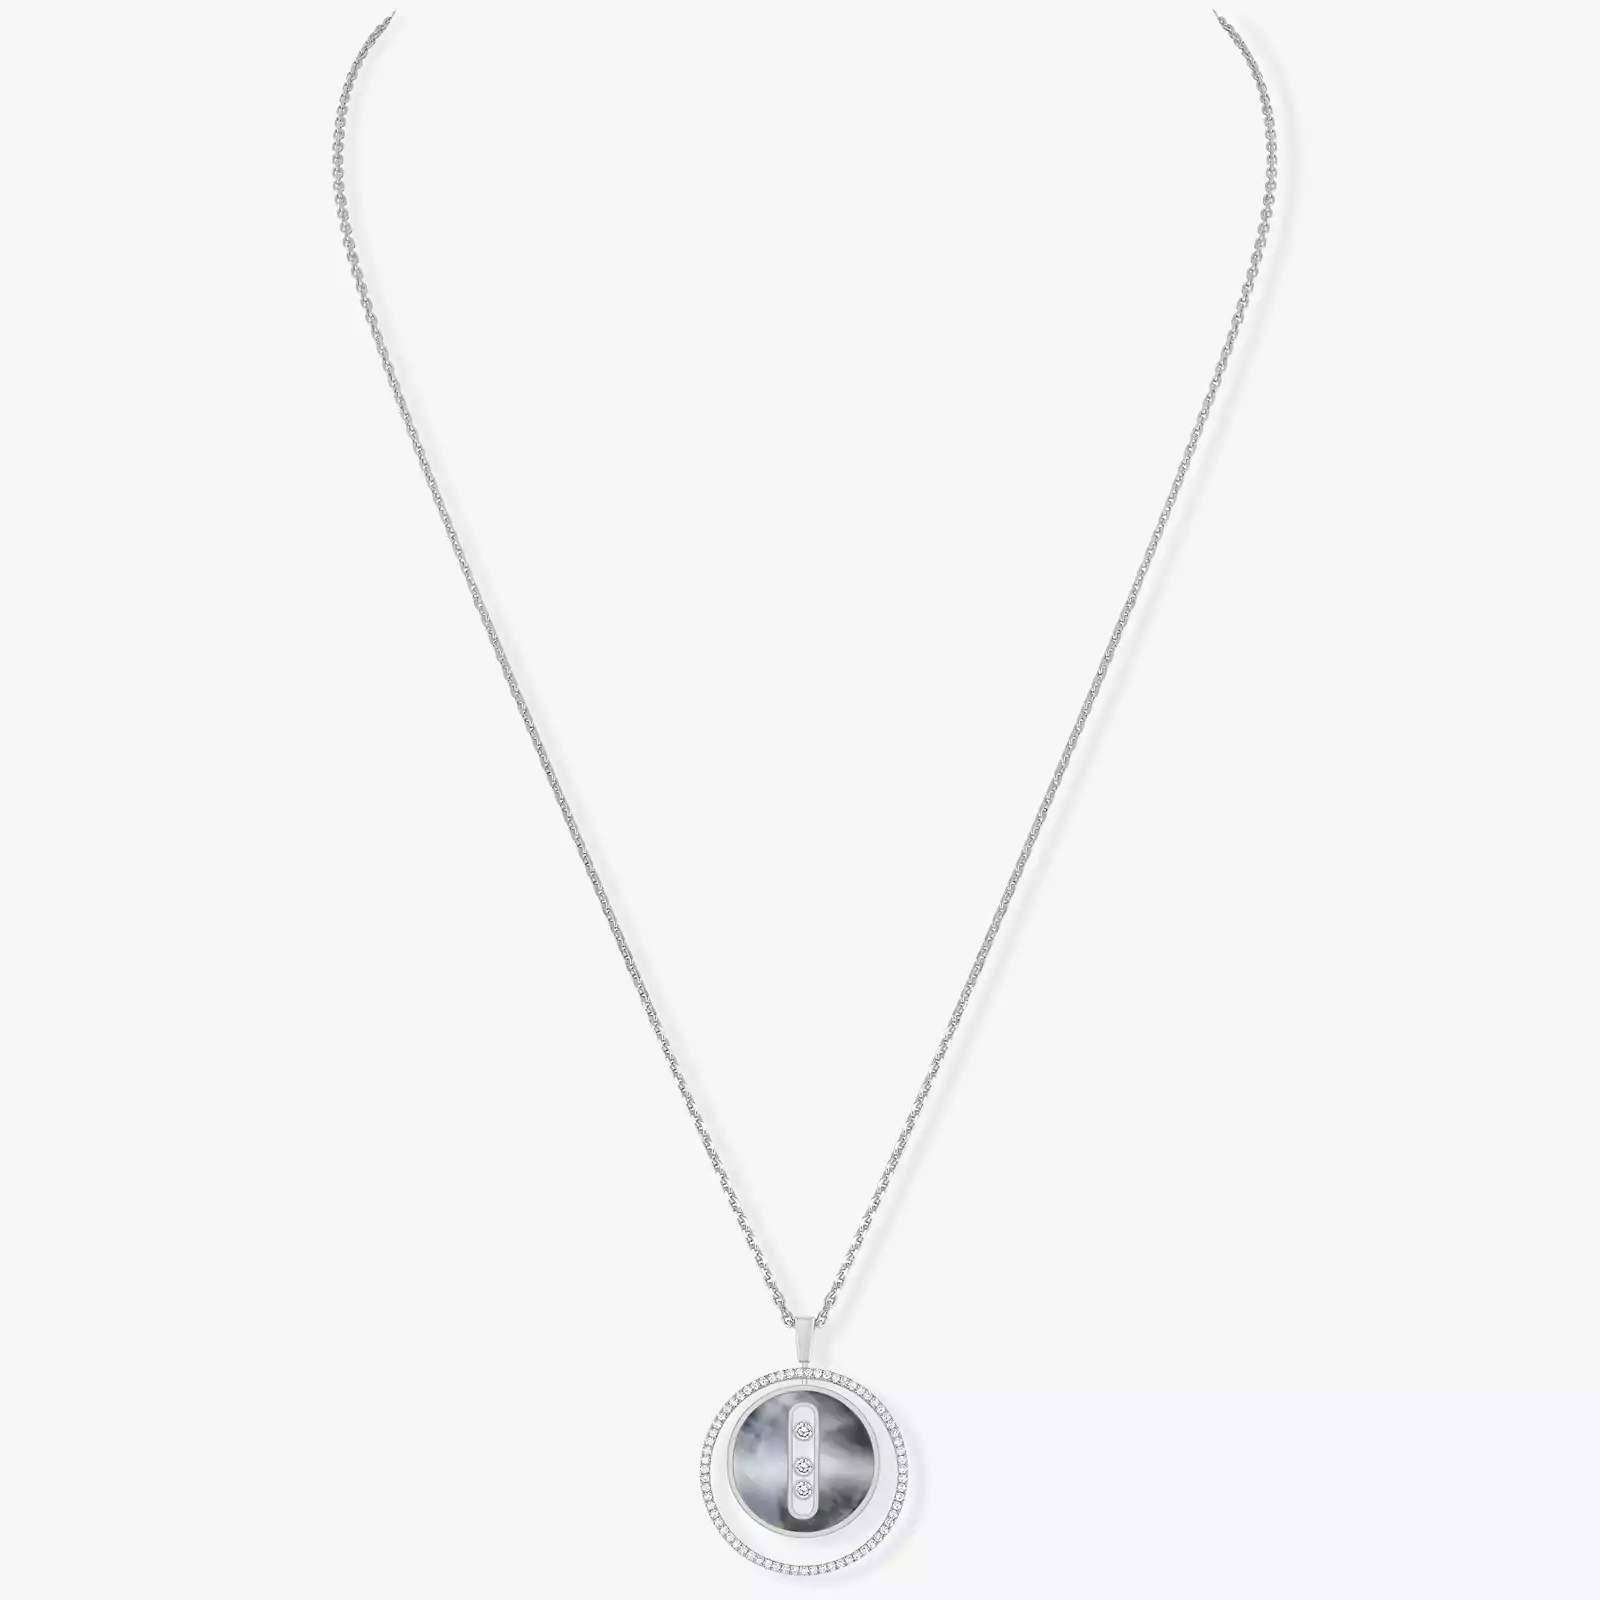 Collier Femme Or Blanc Diamant Lucky Move MM Nacre grise 10837-WG